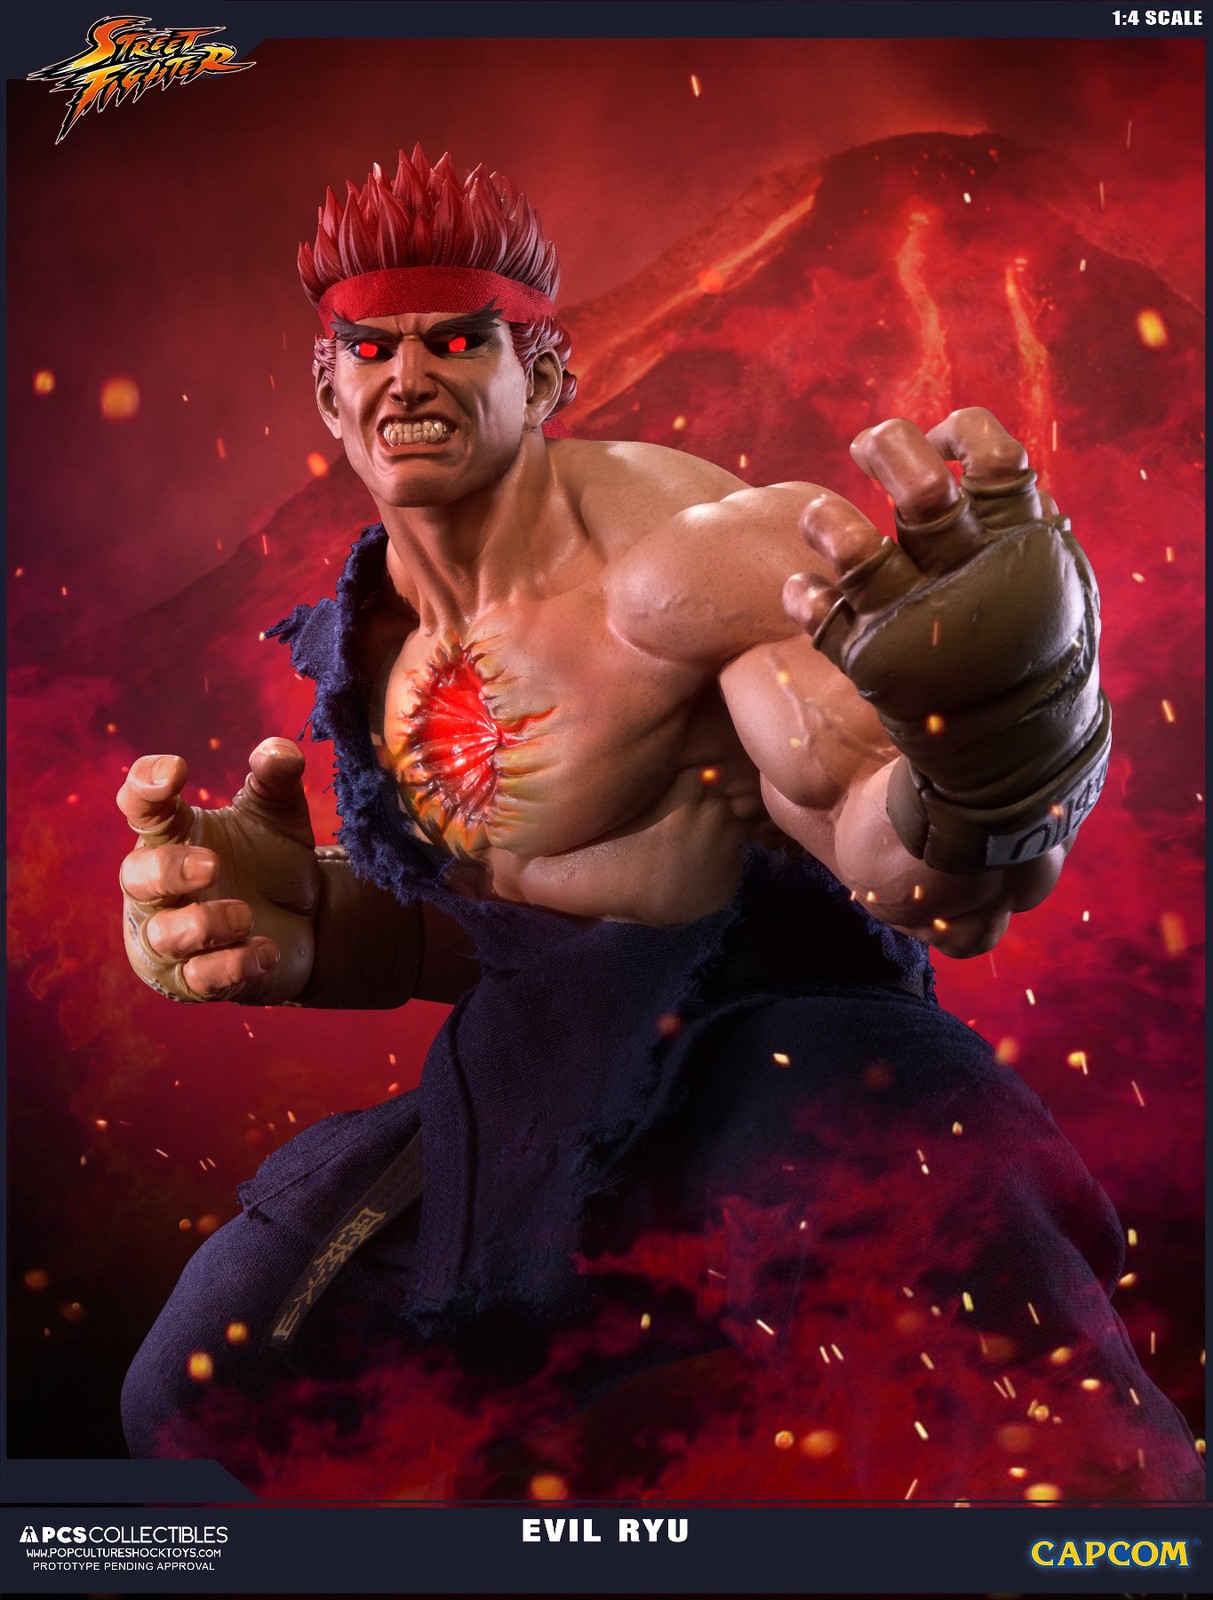 Evil Ryu 1/4 Scale Statues for PCS Collectibles